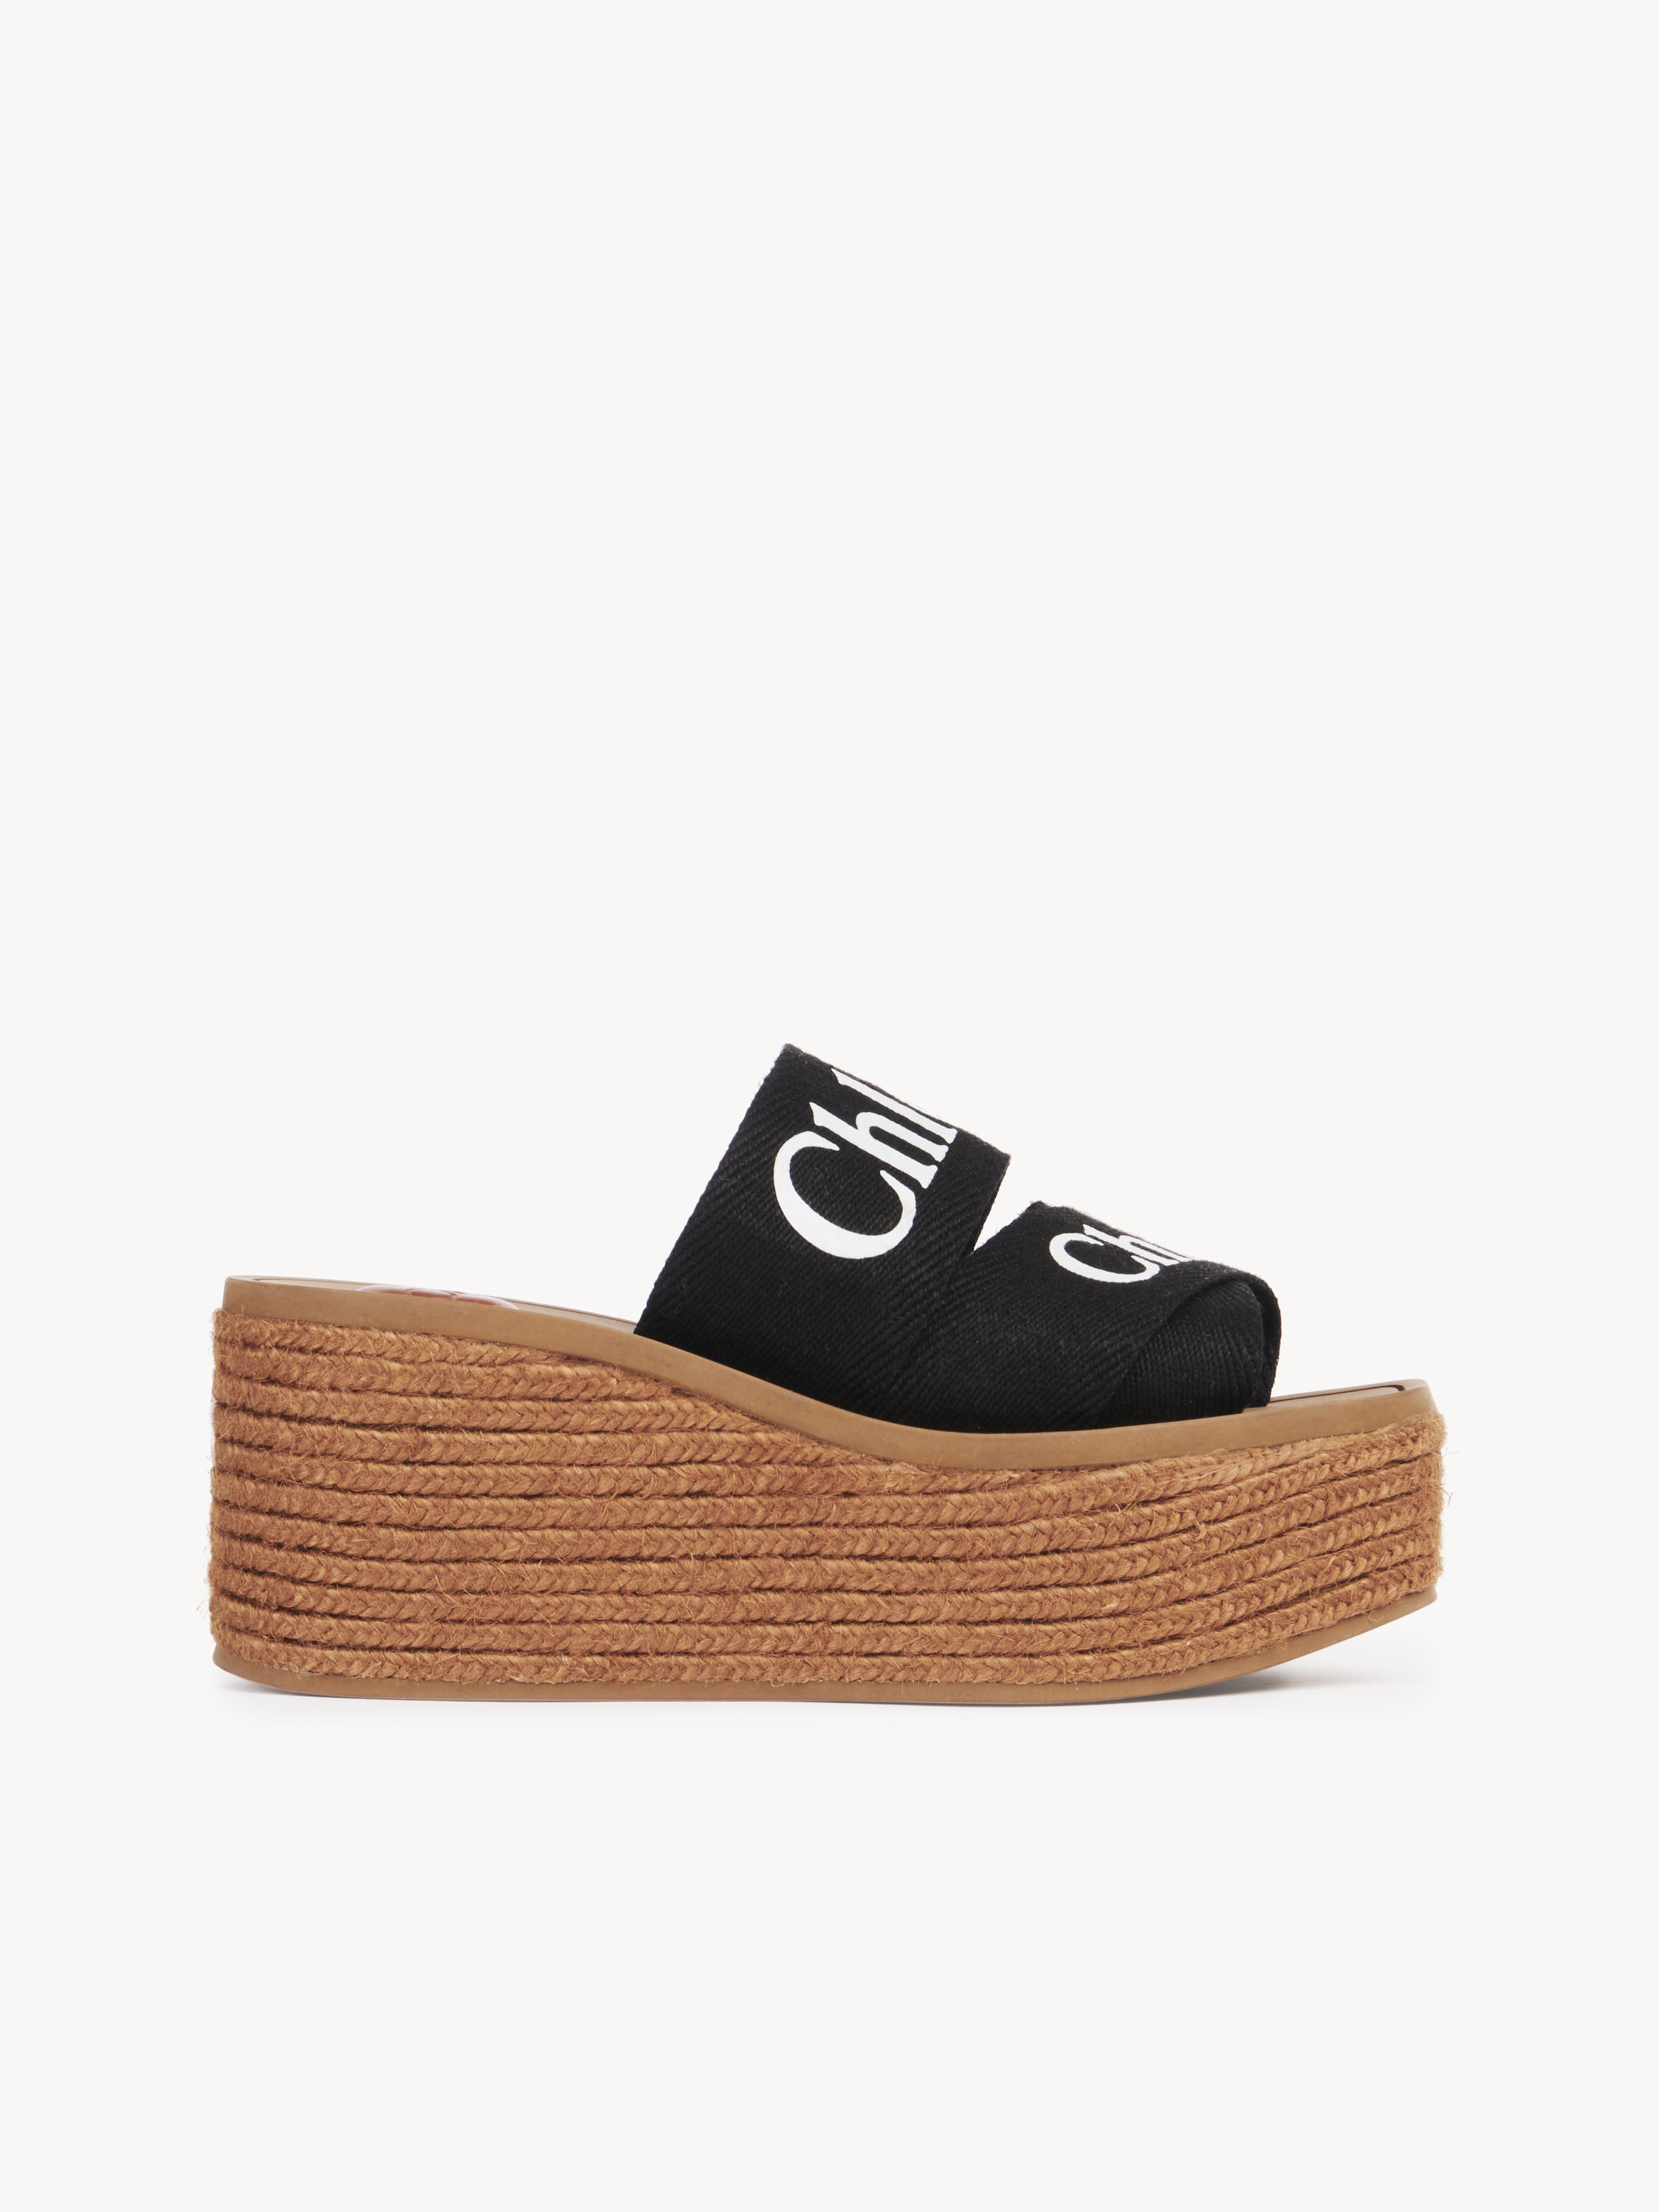 Chloé Mules Espadrilles Woody Femme Noir Taille 41 90% Lin, 10% Polyester, Quercus Suber, Farmed, Coo Spai